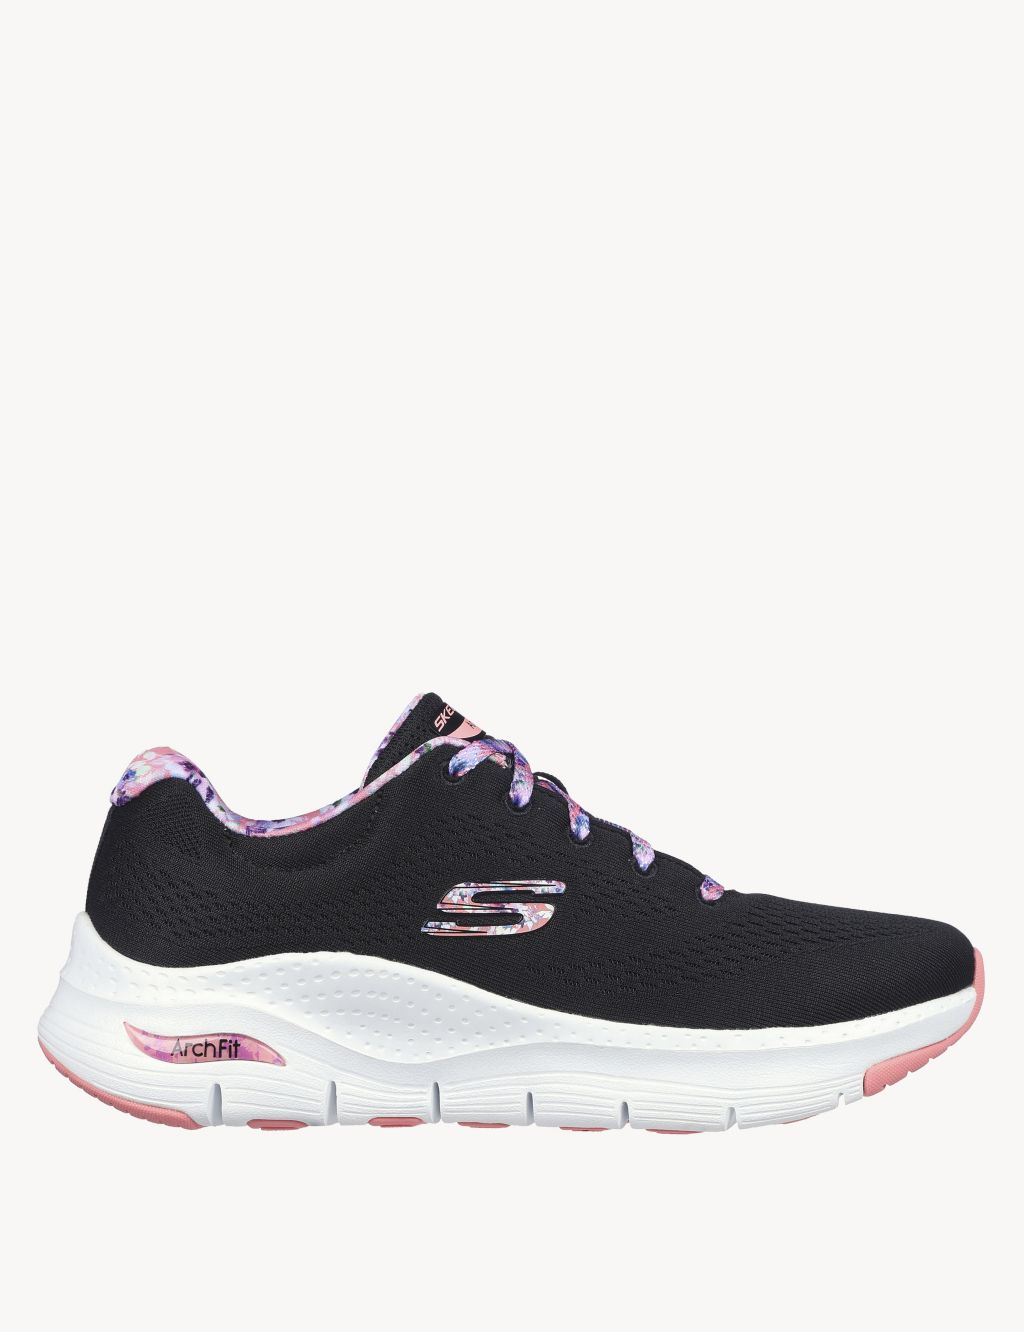 Arch Fit First Blossom Lace Up Trainers image 2